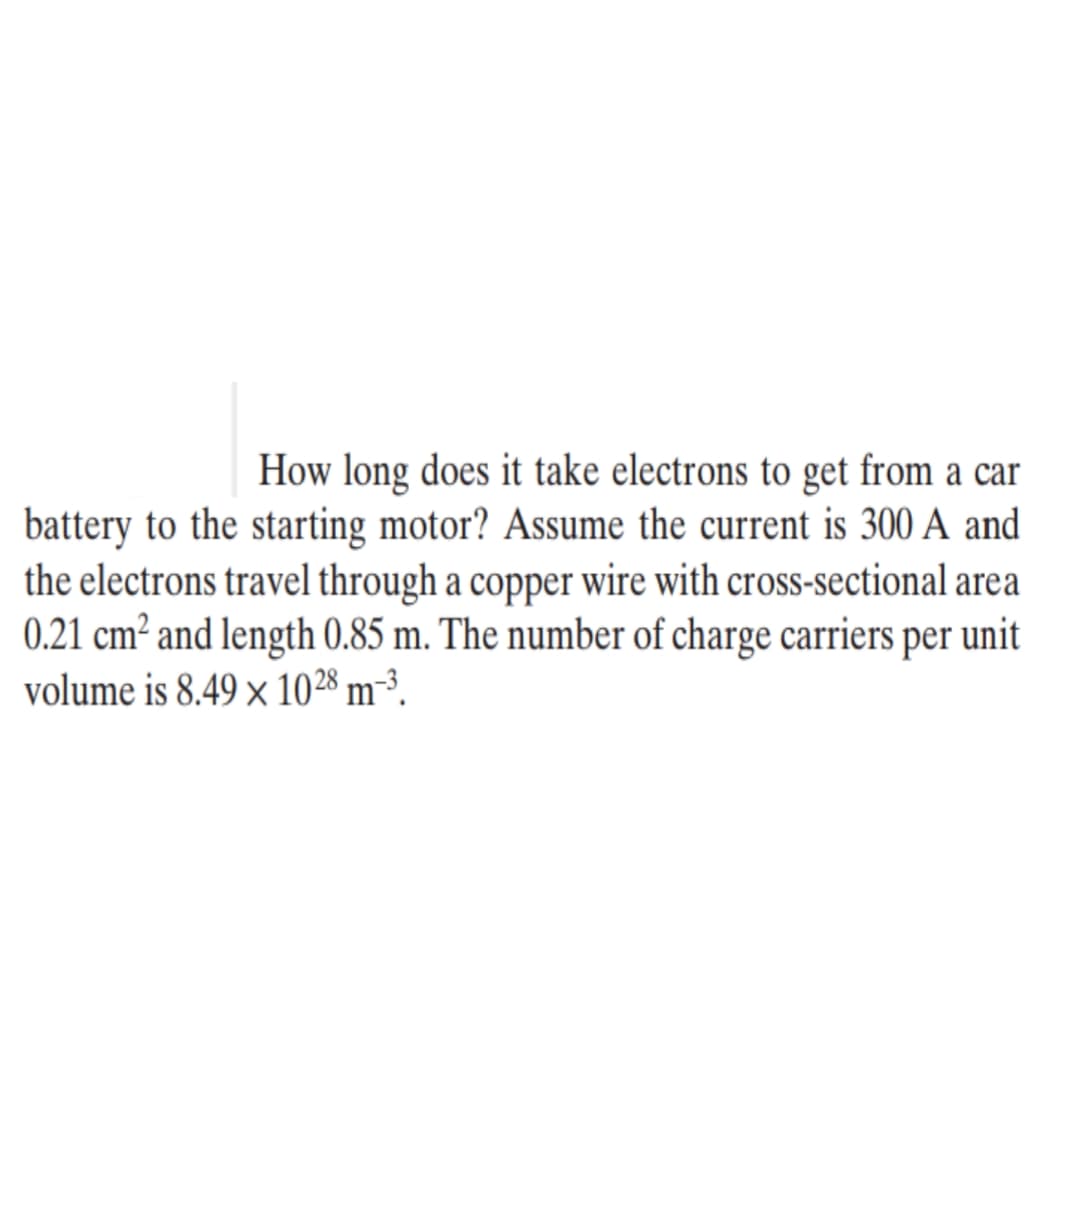 How long does it take electrons to get from a car
battery to the starting motor? Assume the current is 300 A and
the electrons travel through a copper wire with cross-sectional area
0.21 cm² and length 0.85 m. The number of charge carriers per unit
volume is 8.49 x 1028 m-³.
